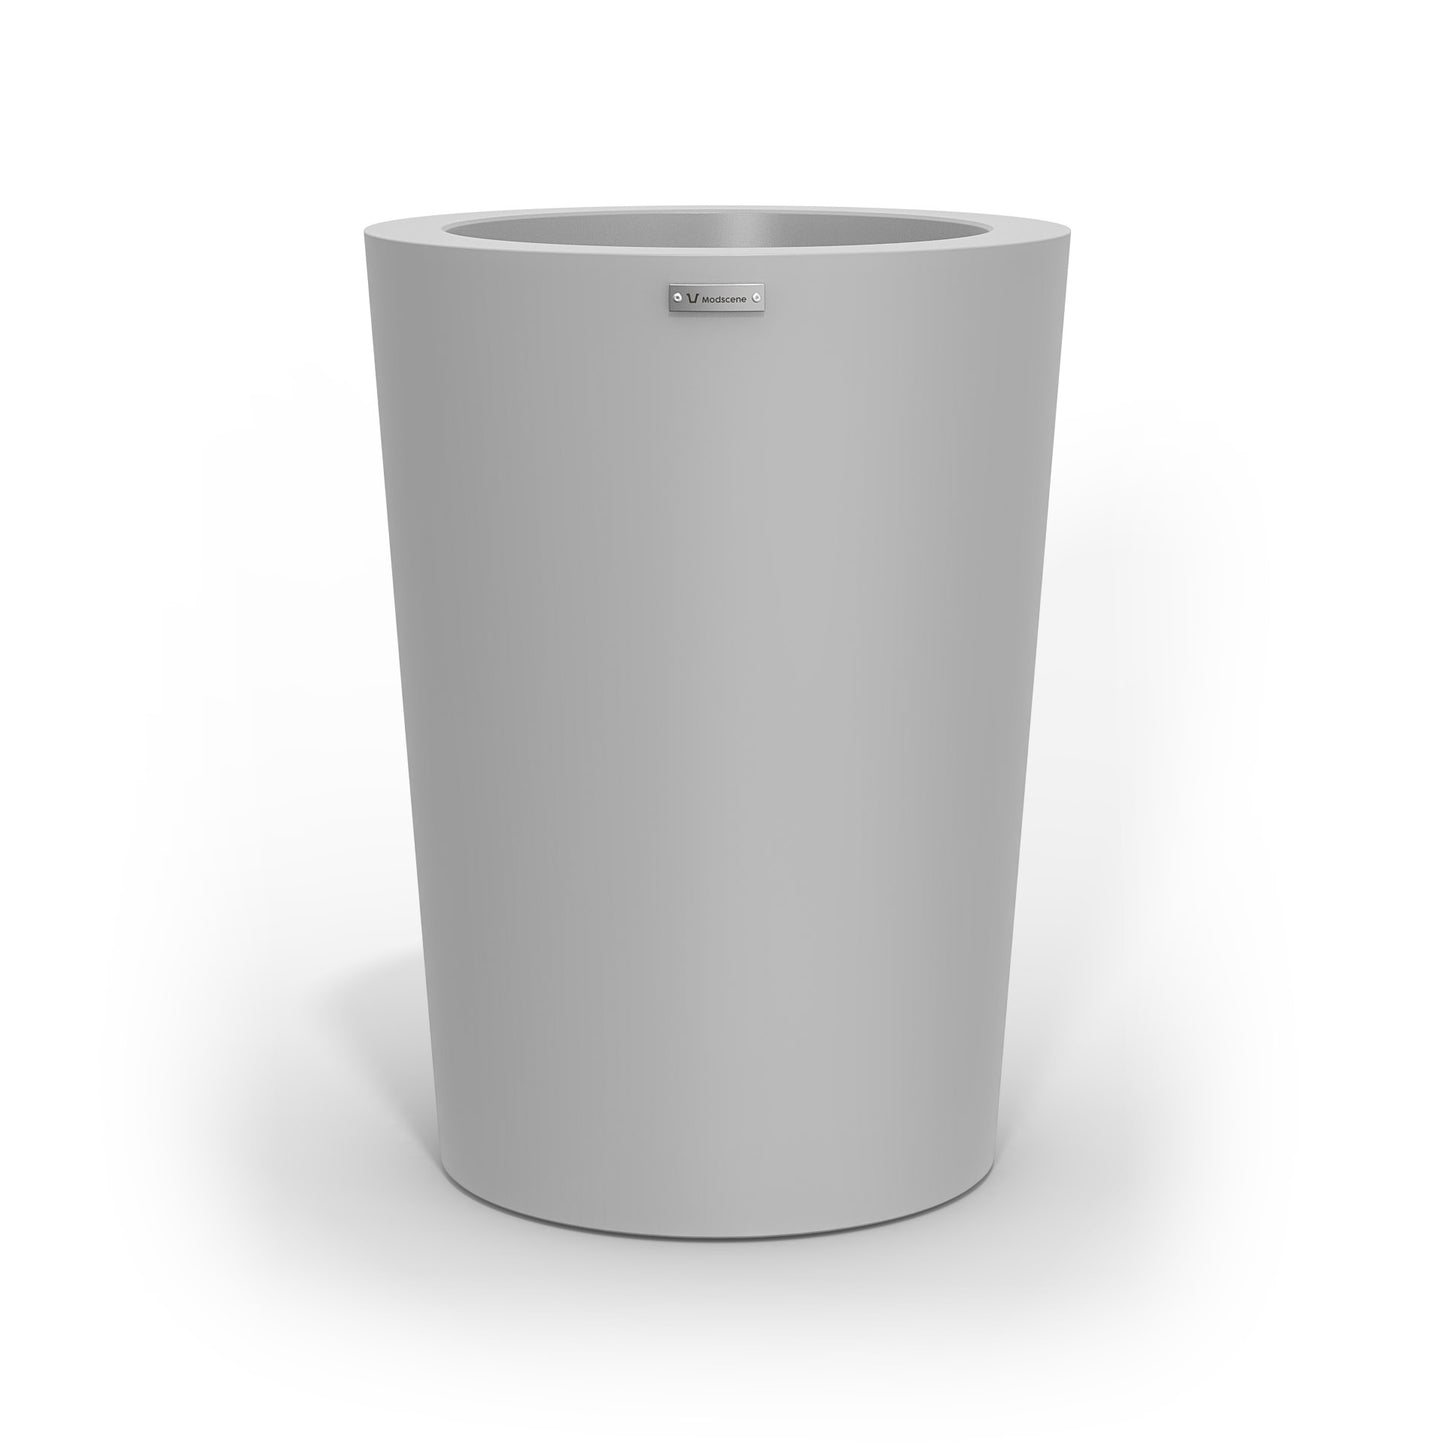 A modern style planter pot in a light grey colour. Made by Modscene NZ.